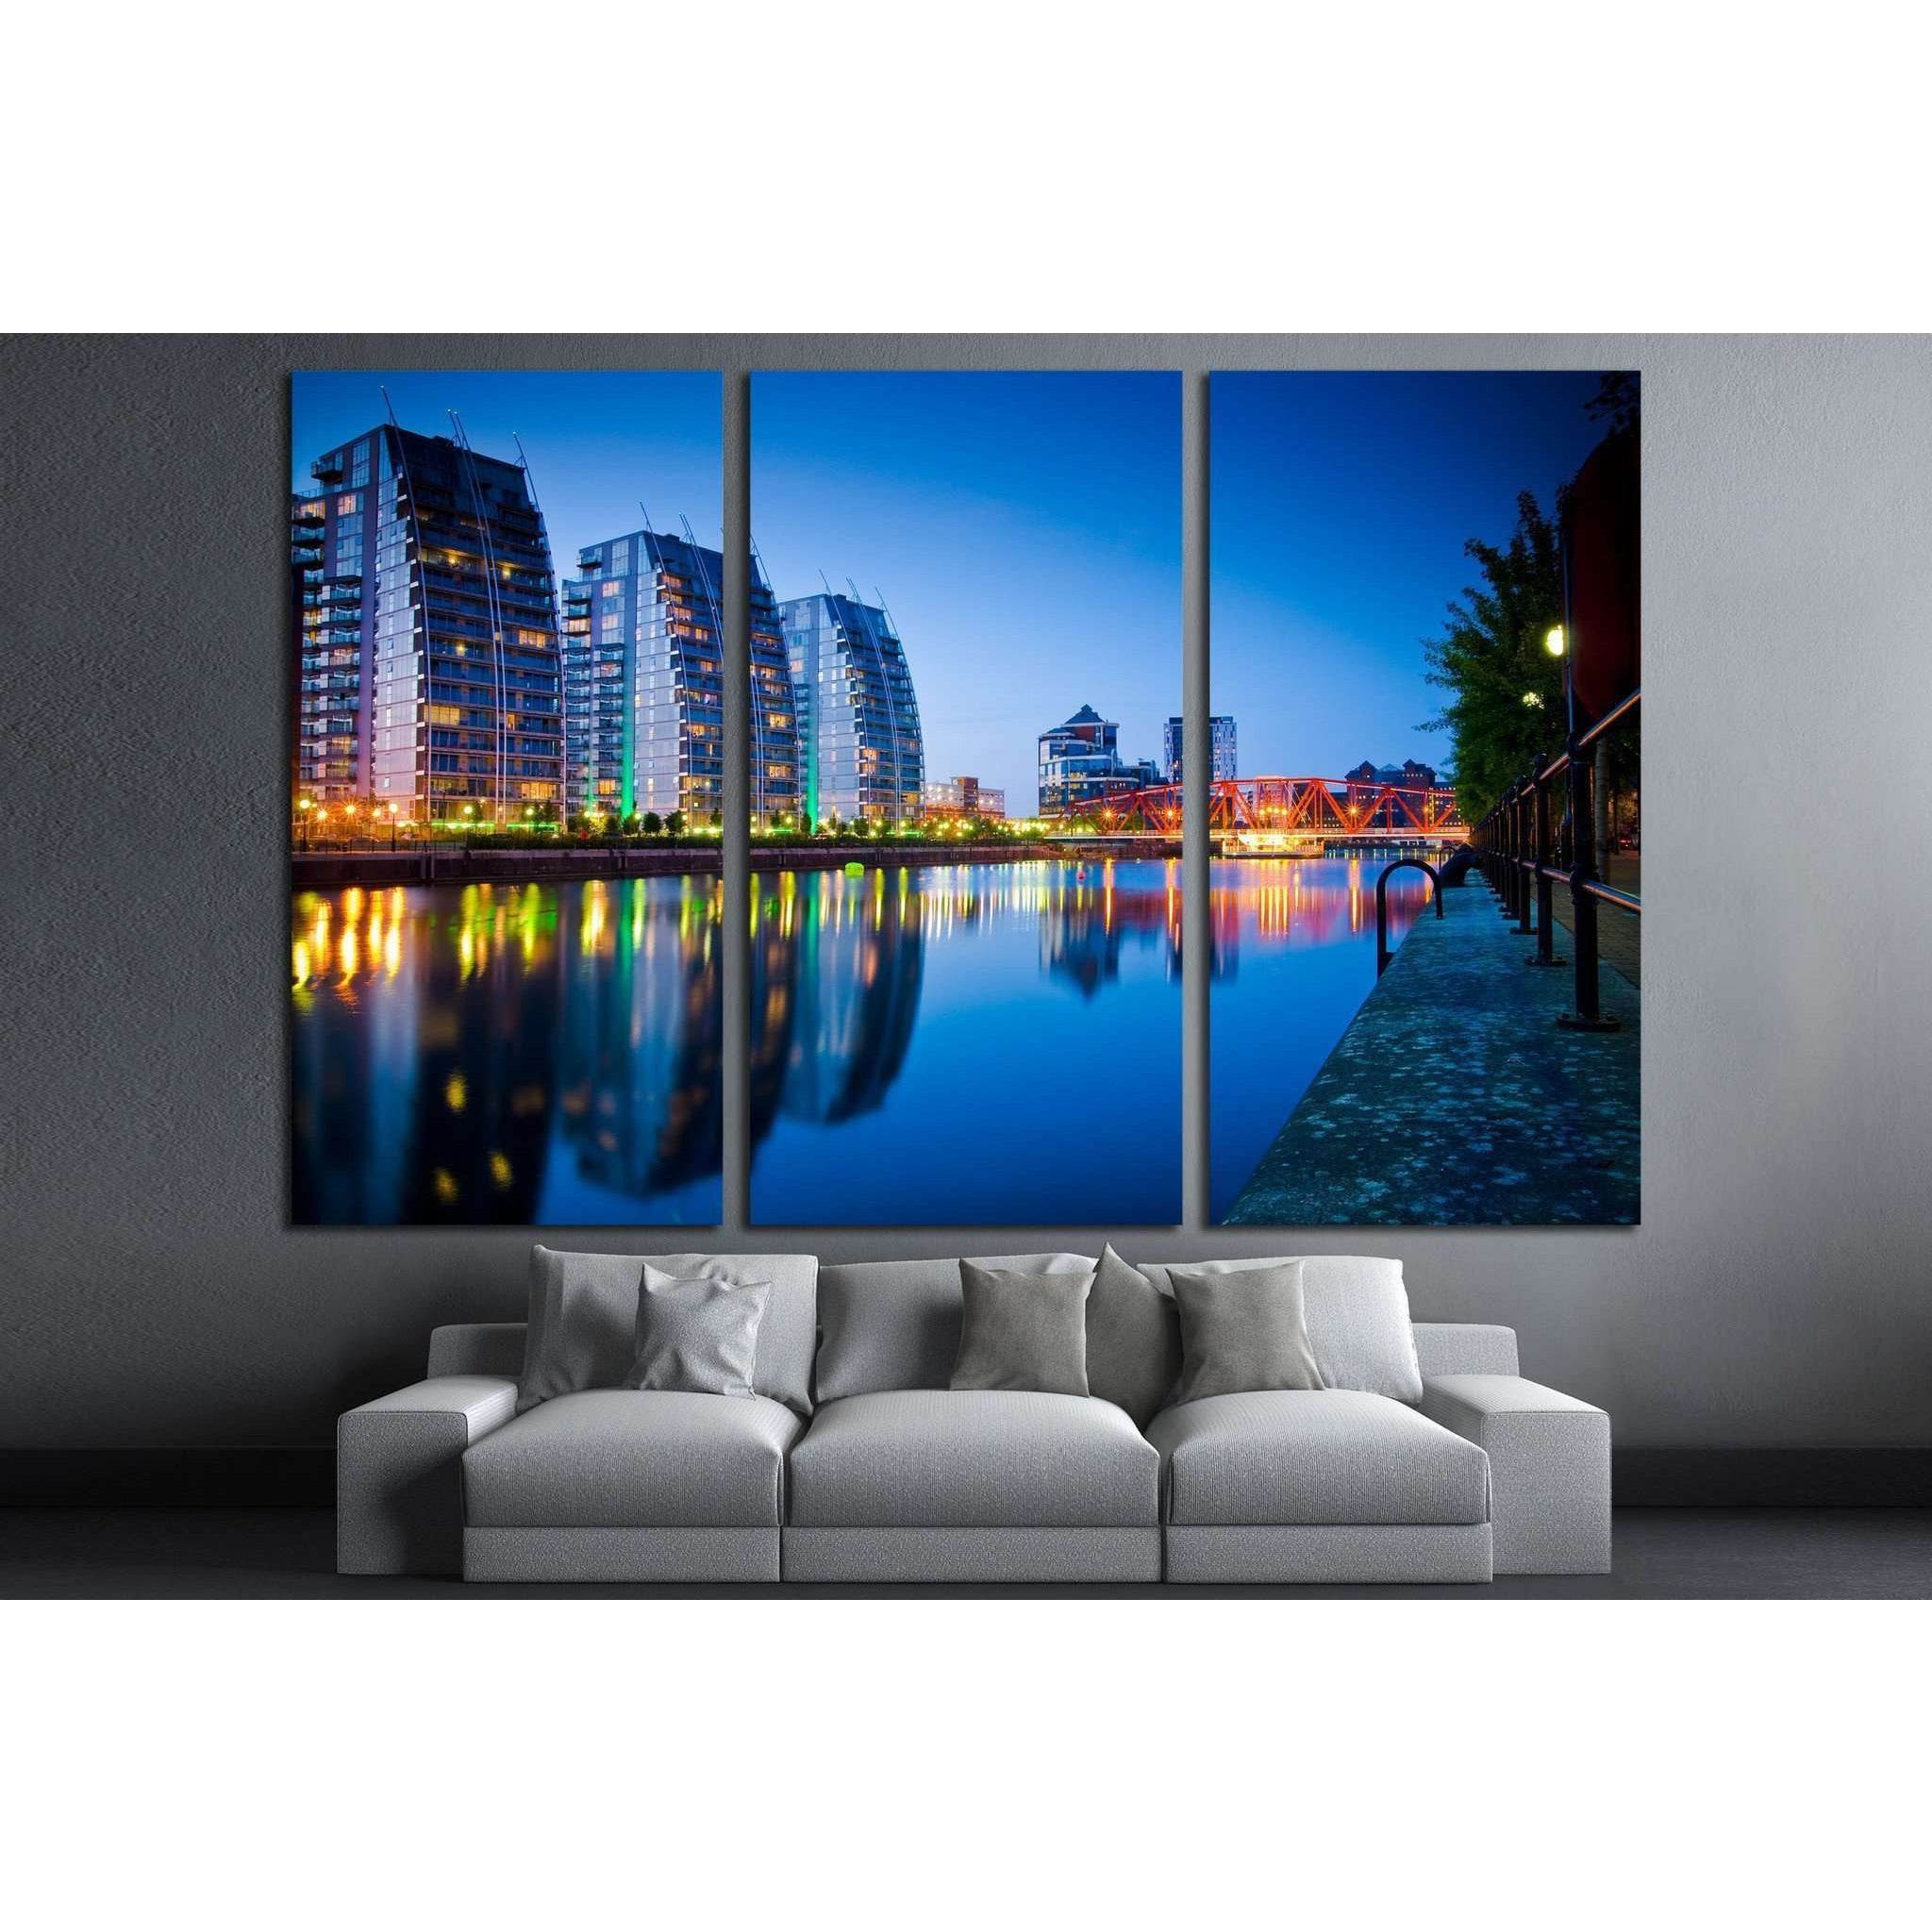 Beautiful skyline of Salford Quays Manchester №2046 Ready to Hang Canvas Print